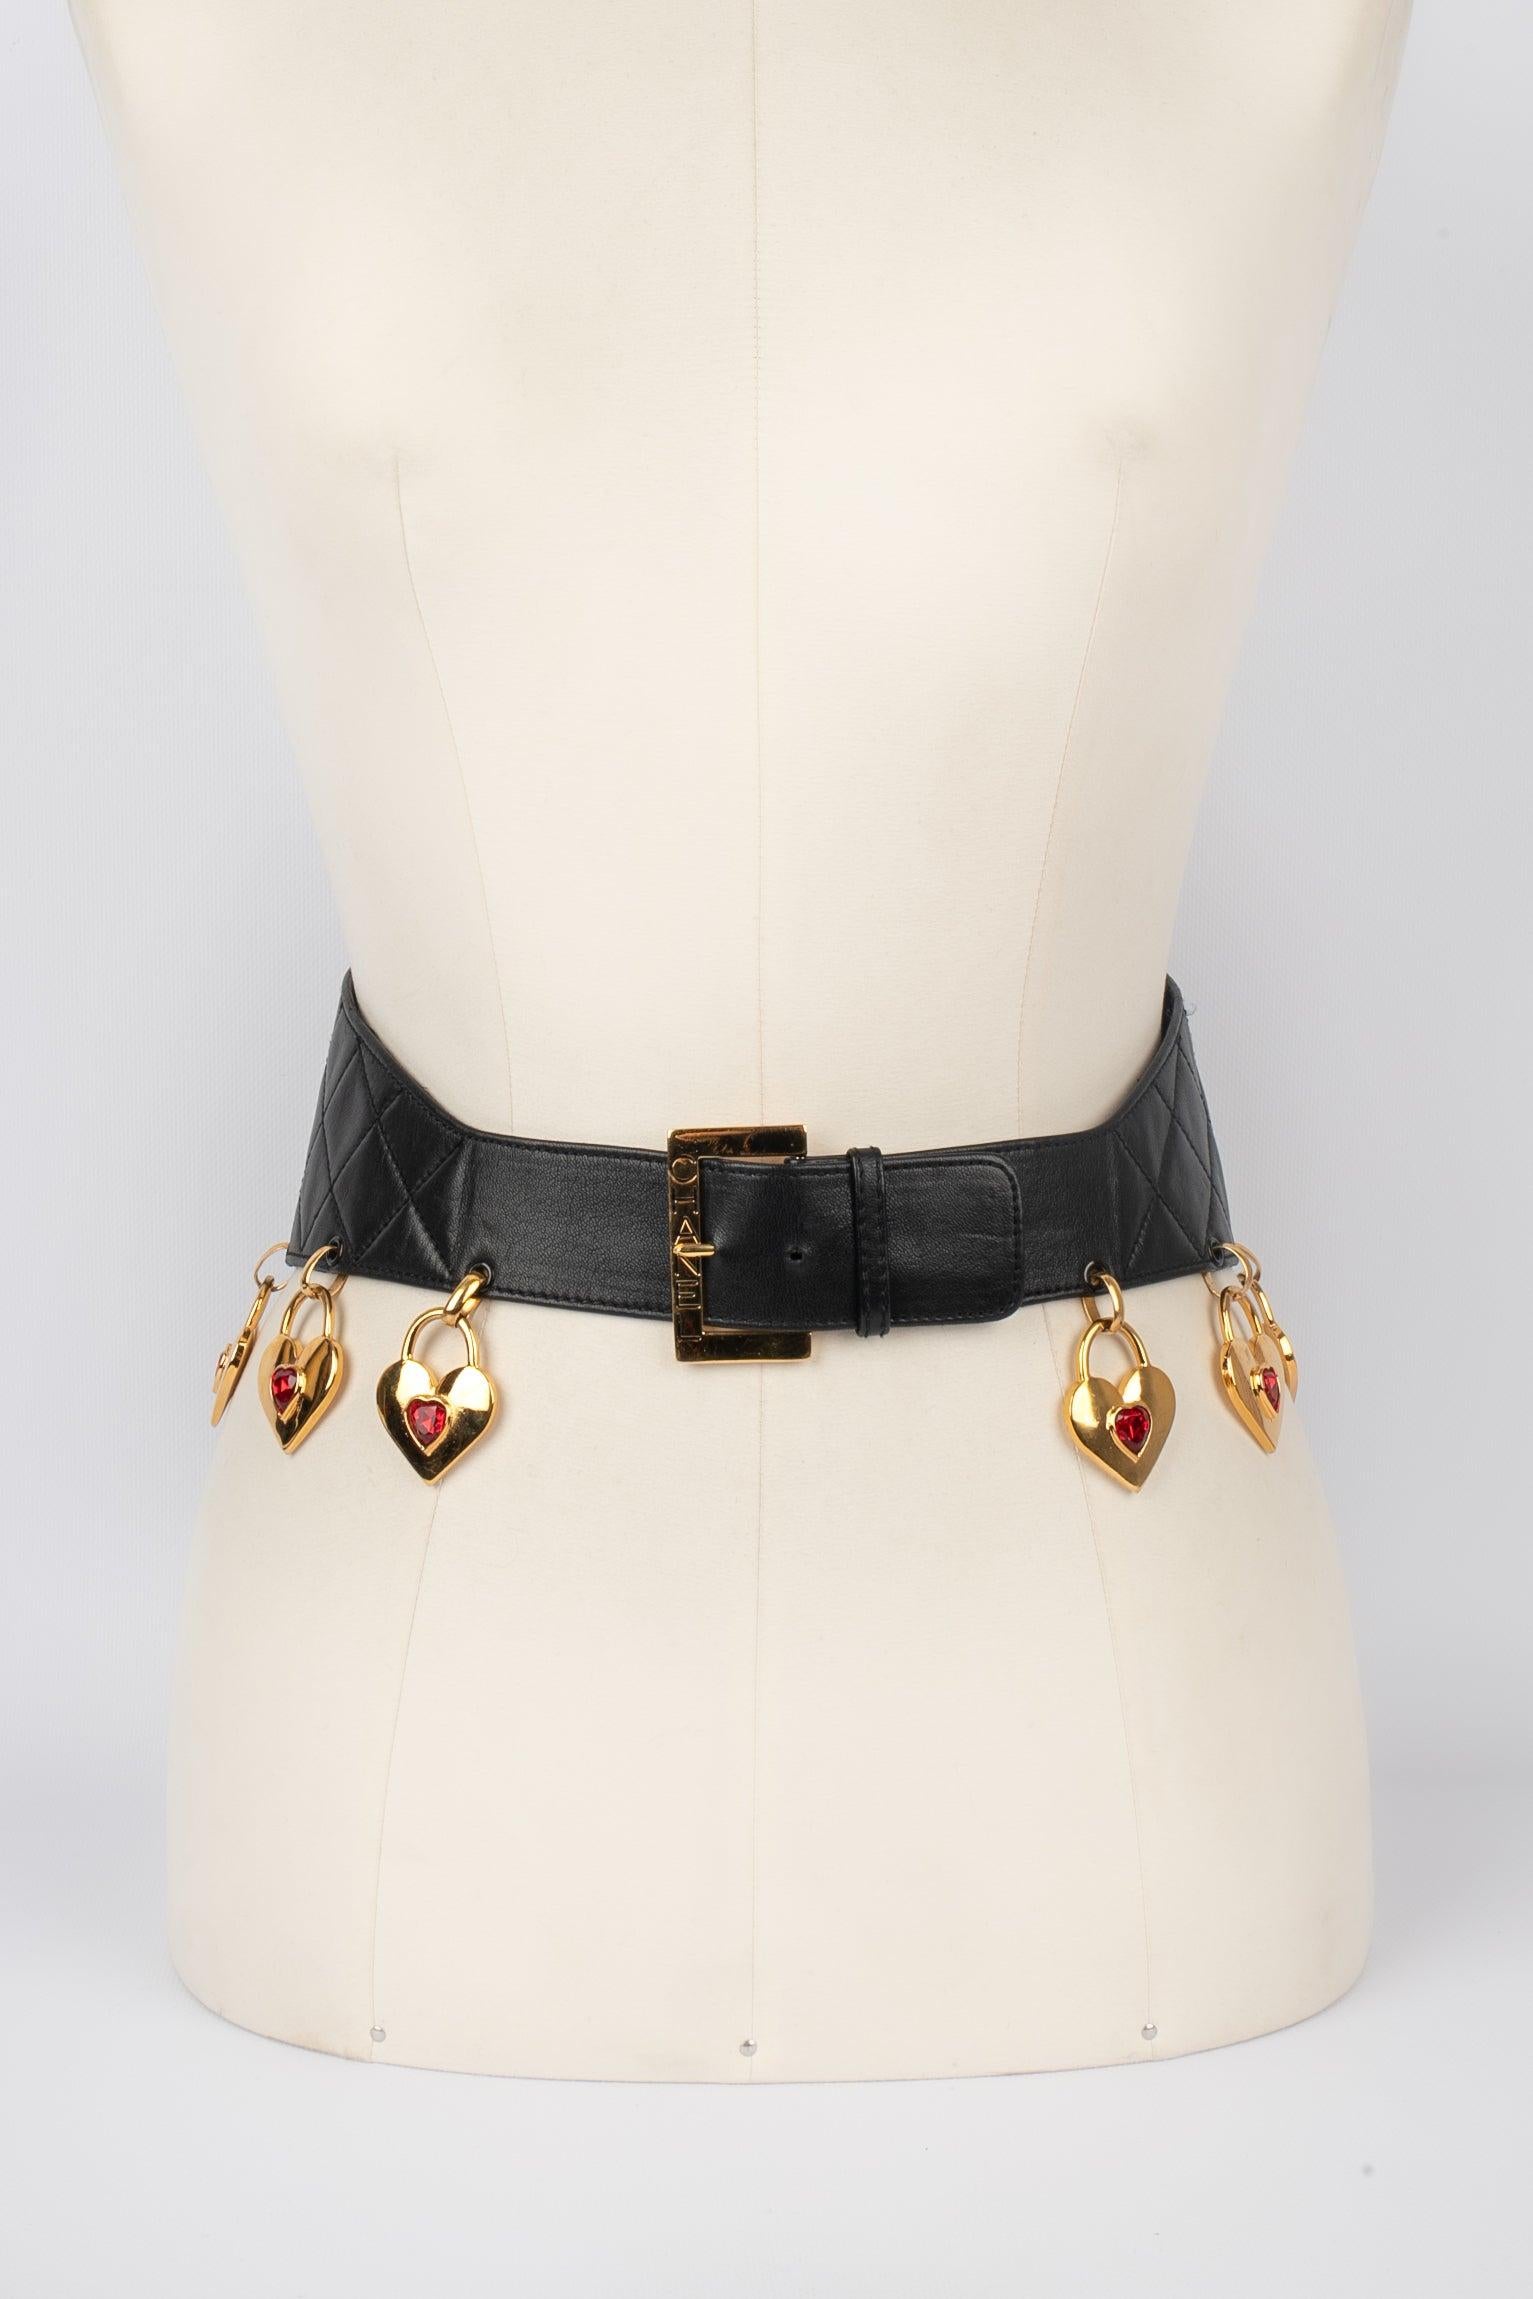 Chanel- (Made in France) Quilted black leather belt ornamented with golden metal heart charms topped with red rhinestones.

Additional information:
Condition: Good condition
Dimensions: Length: 69 cm to 71 cm

Seller Reference: CCB34

